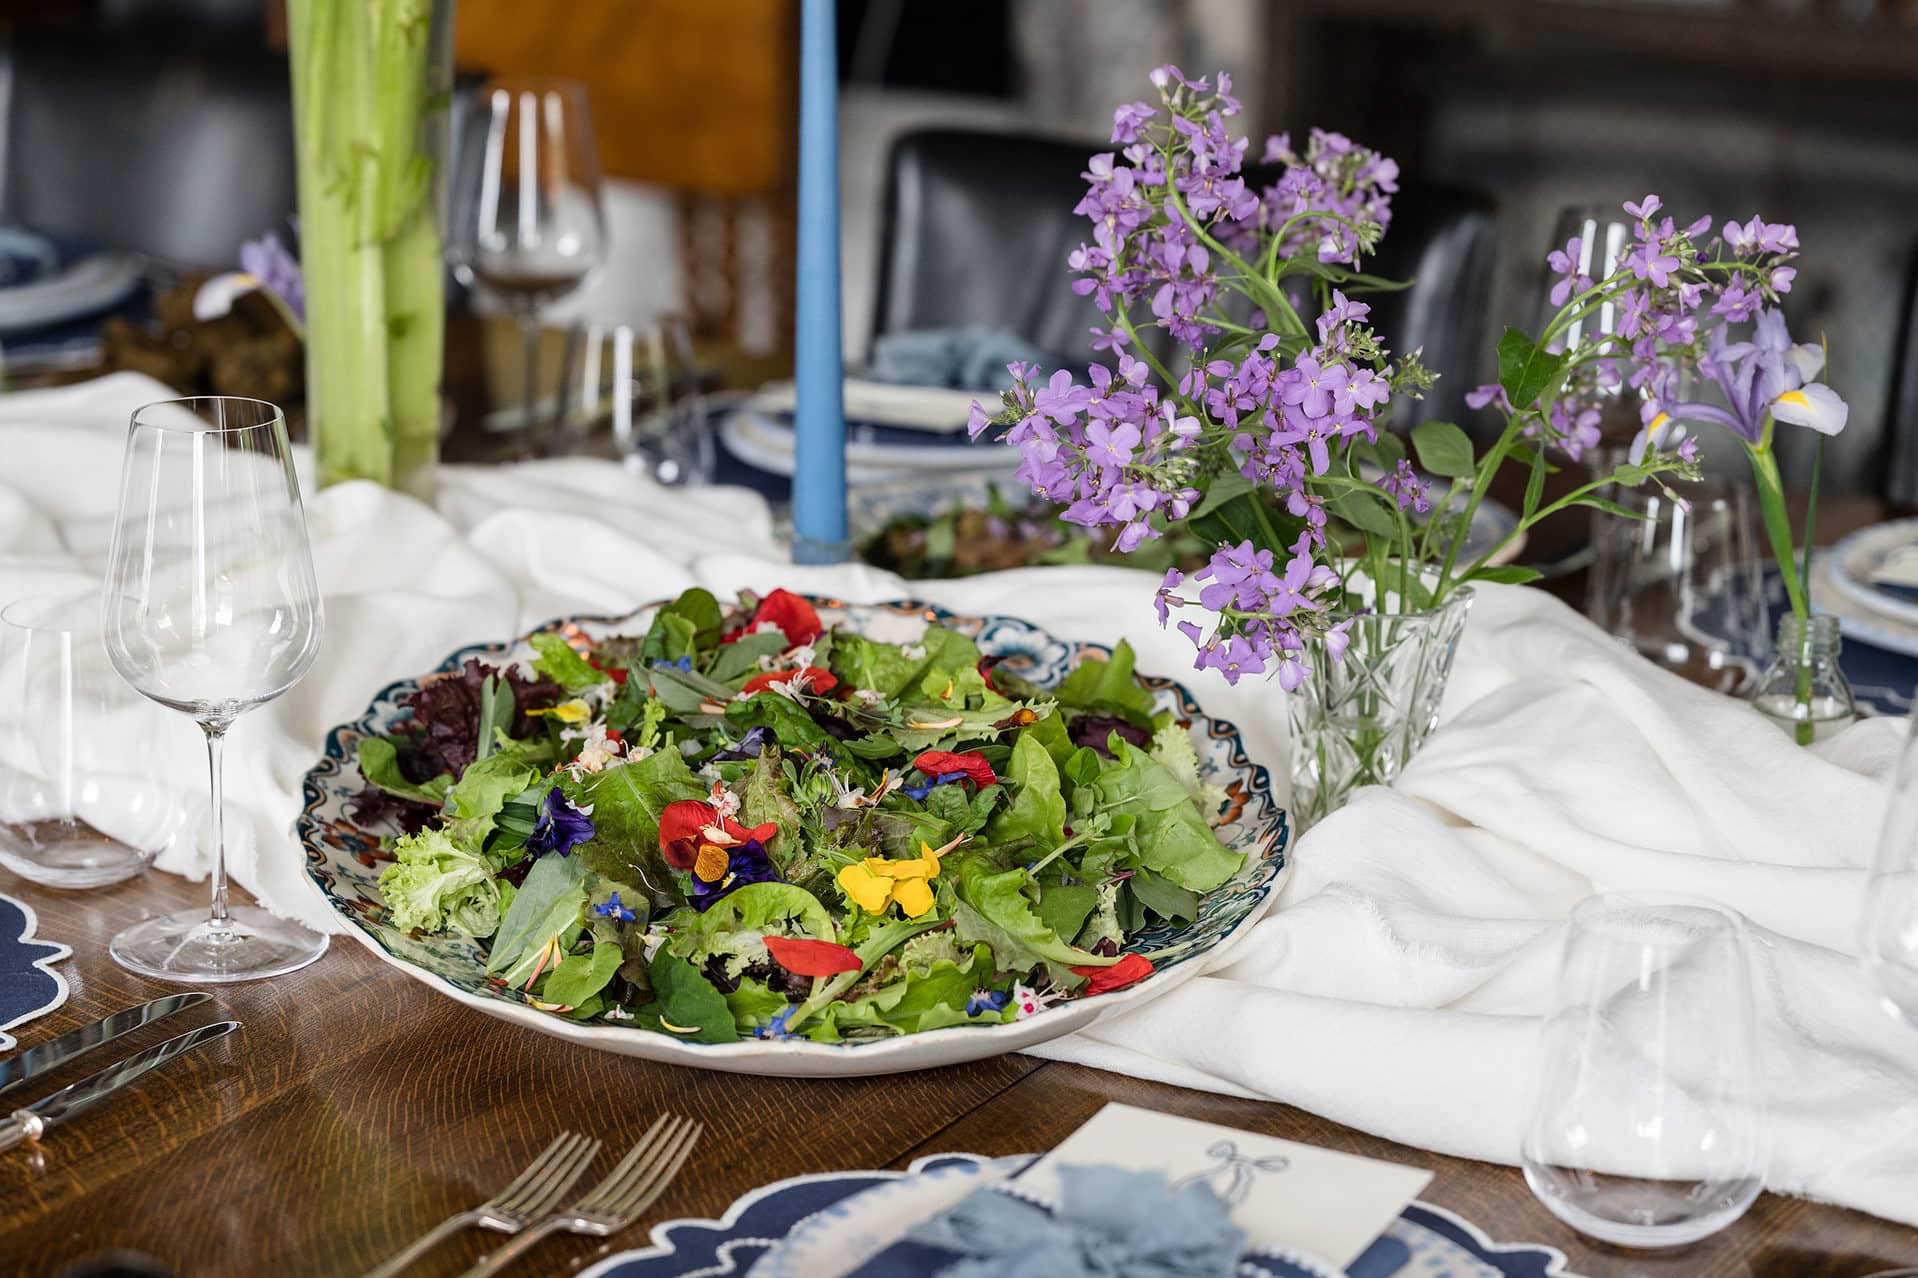 A fresh salad finished off with edible flowers served in an antique scallop edge serving bowl